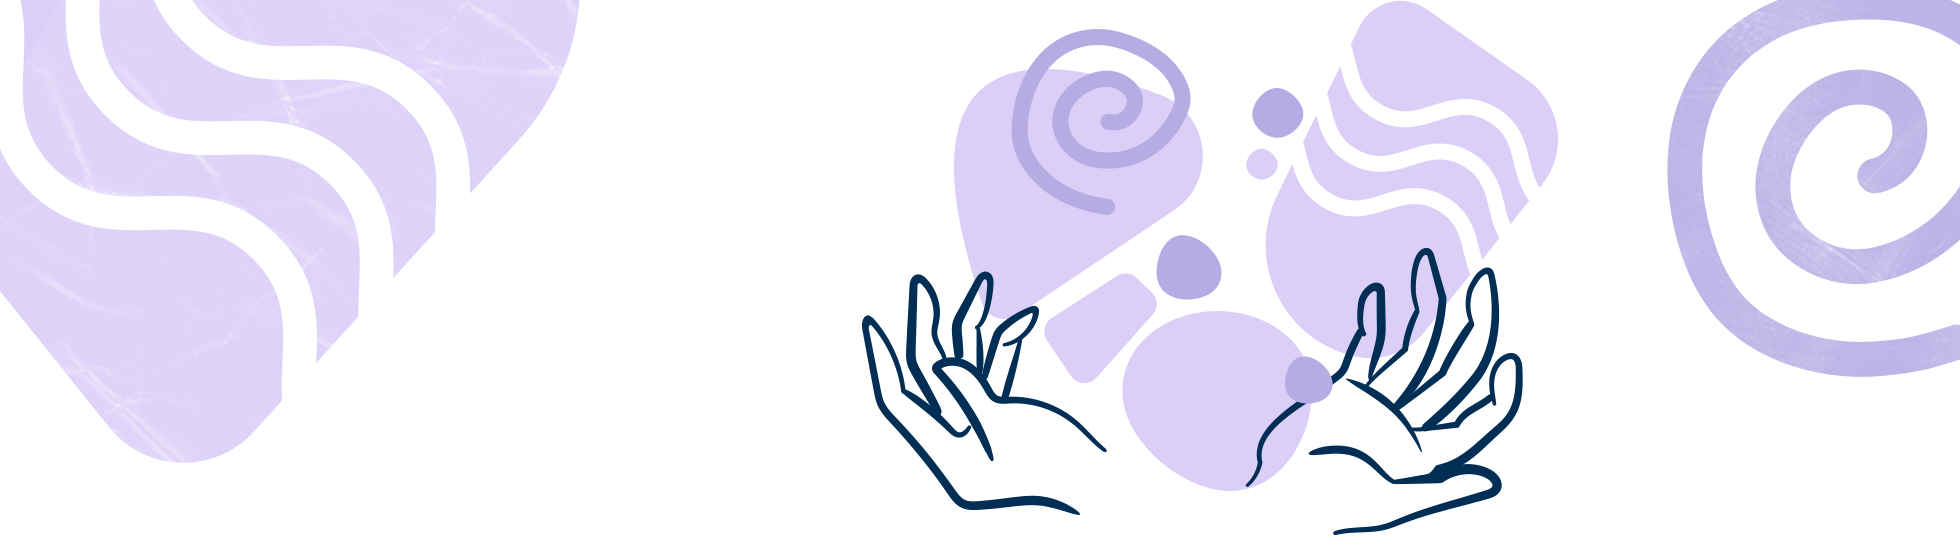 Hands with purple shapes and swirls around them
